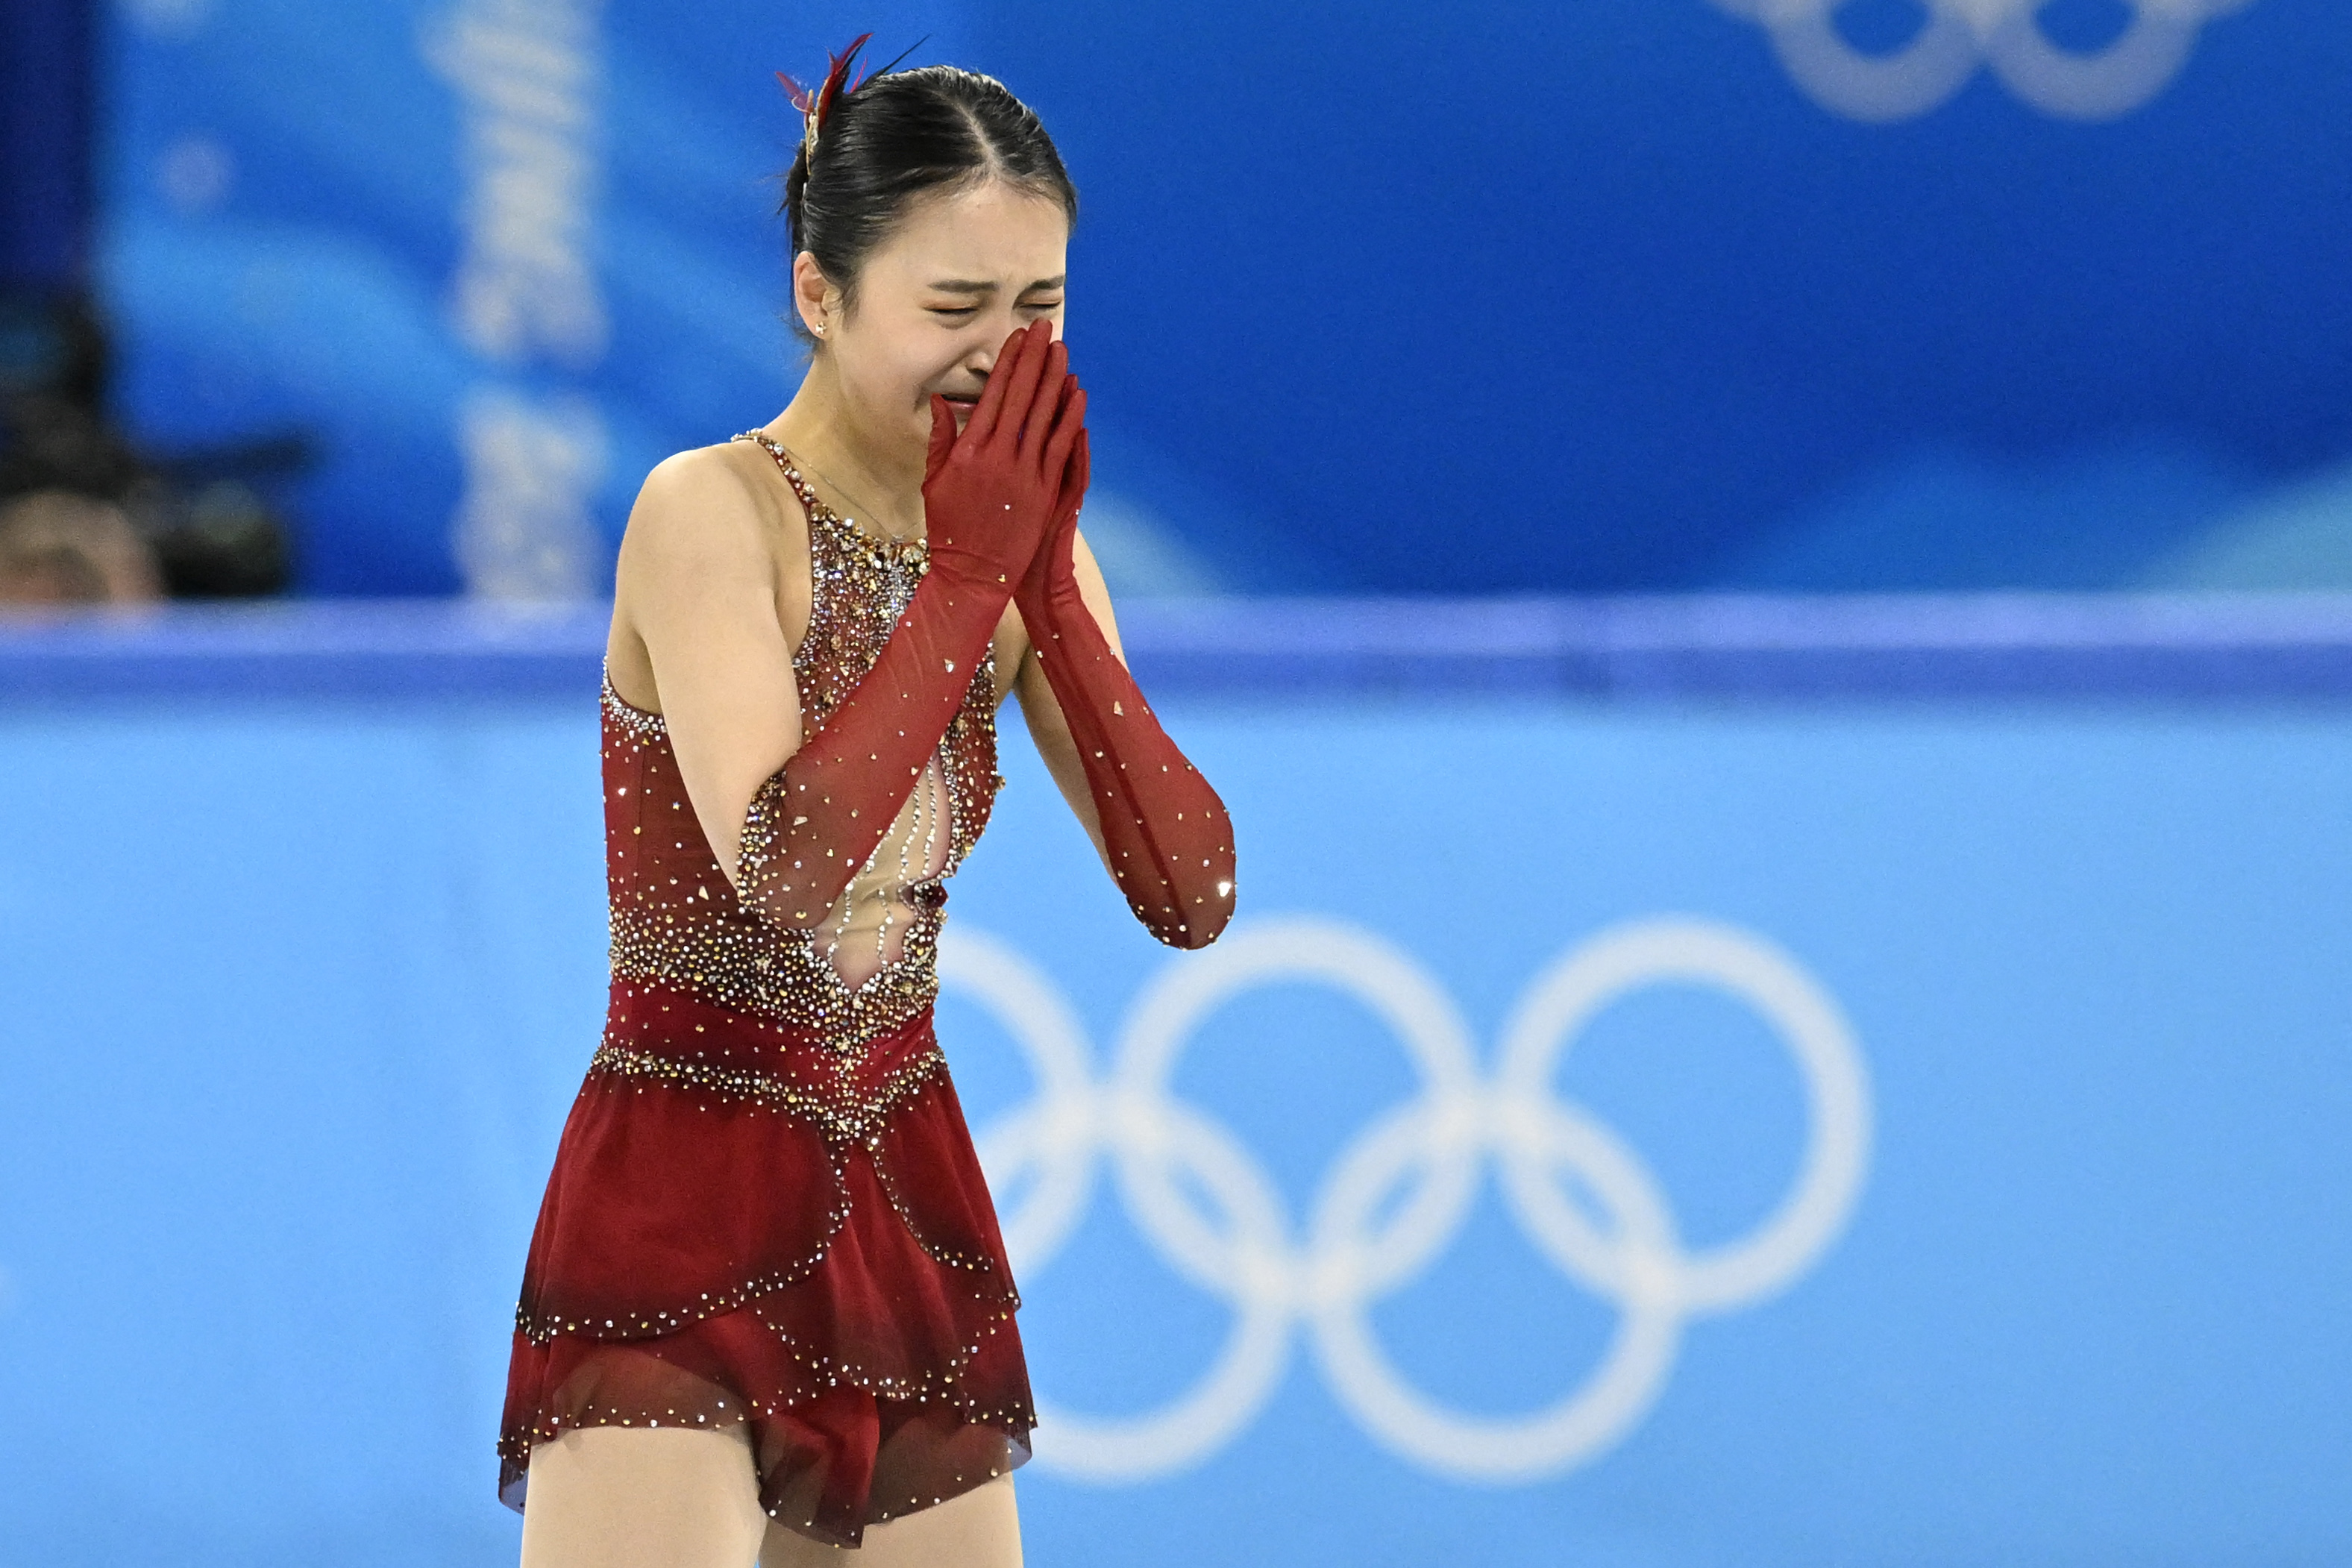 As China Celebrates Eileen Gu, Weibo Suspends Accounts Over Another Athlete